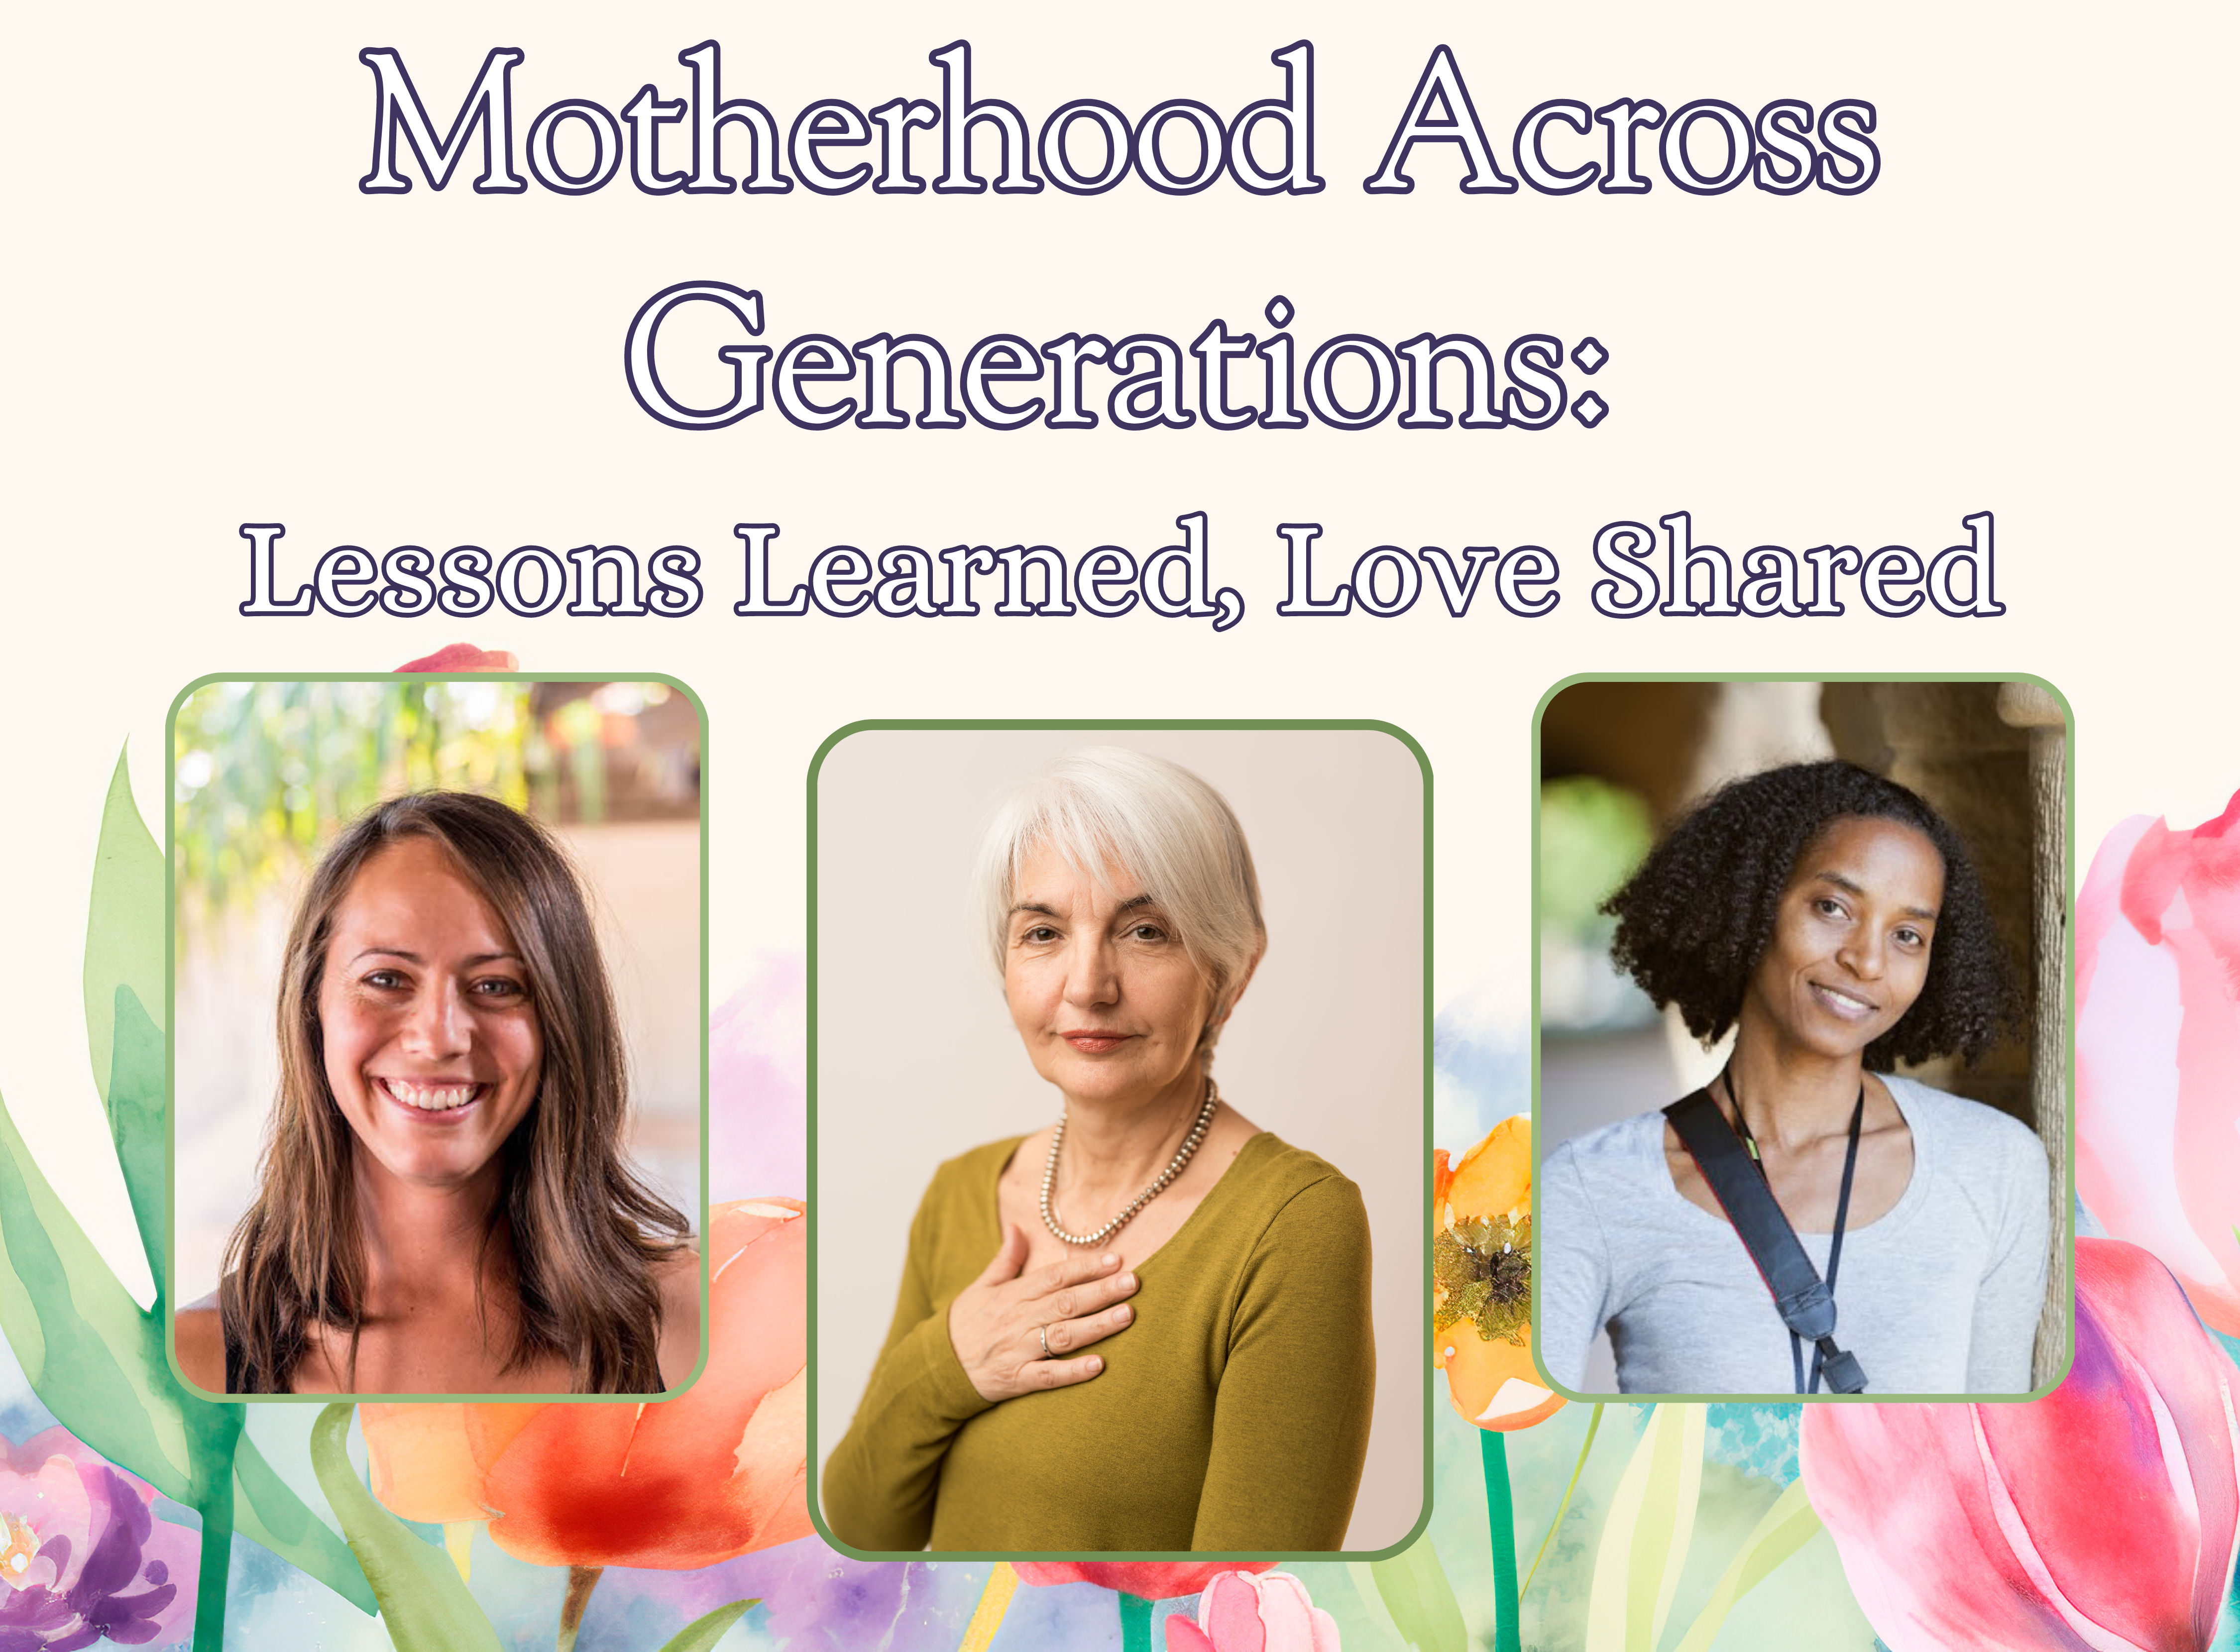 Motherhood Across Generations: Lessons Learned, Love Shared